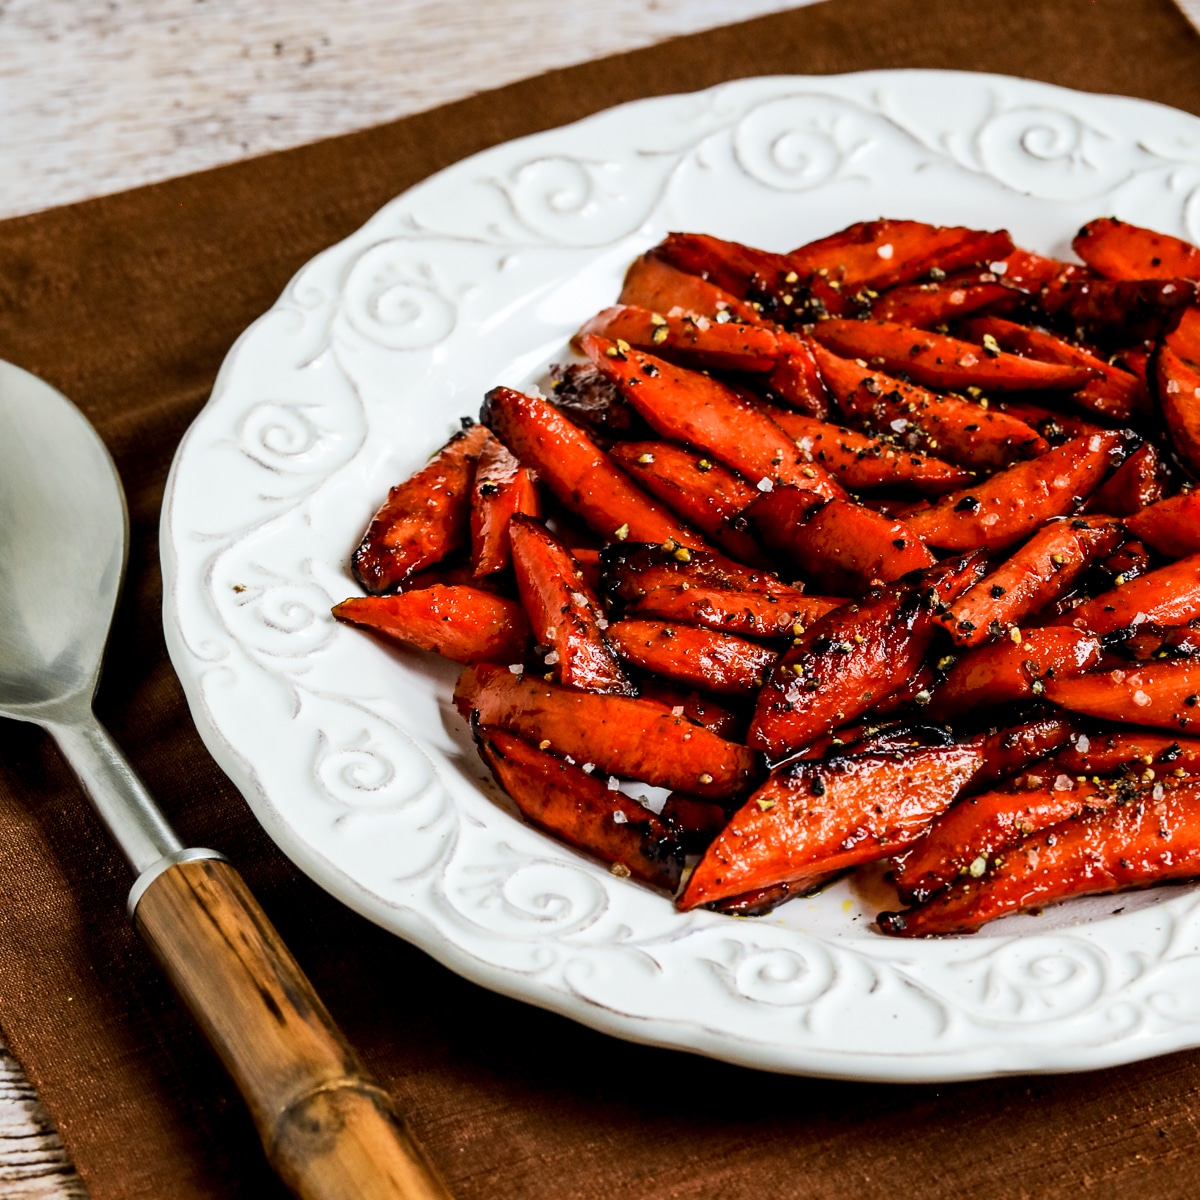 Square image for Maple Glazed Carrots shown on serving plater.